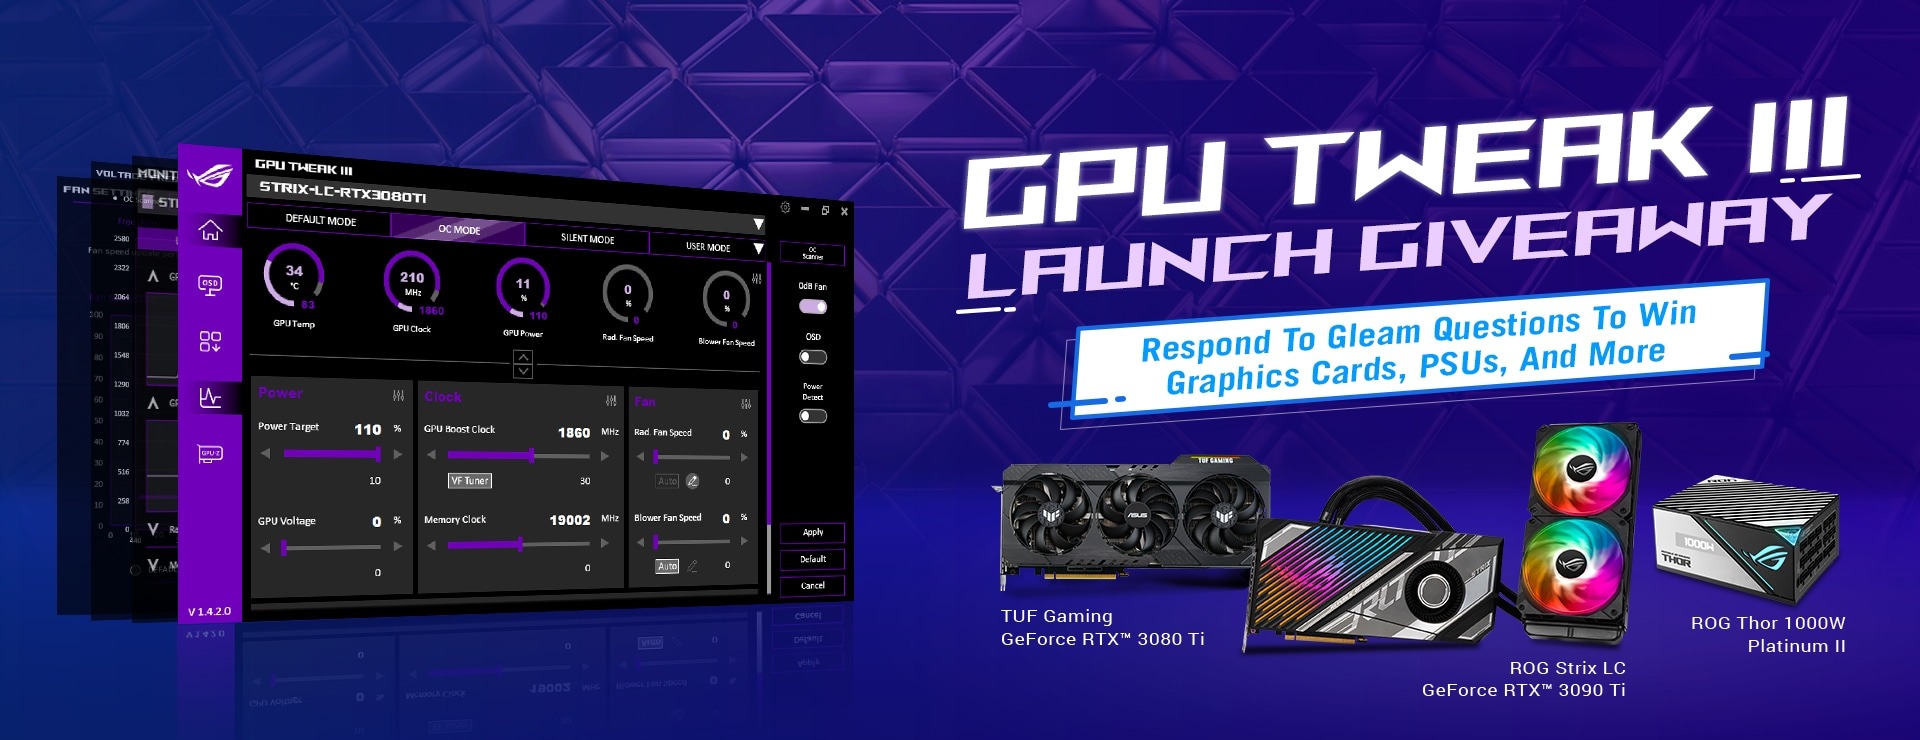 Motel Tempel forstyrrelse ASUS launches GPU Tweak III tool for AMD and NVIDIA GPUs (also announces  RTX 3090 Ti giveaway) - VideoCardz.com